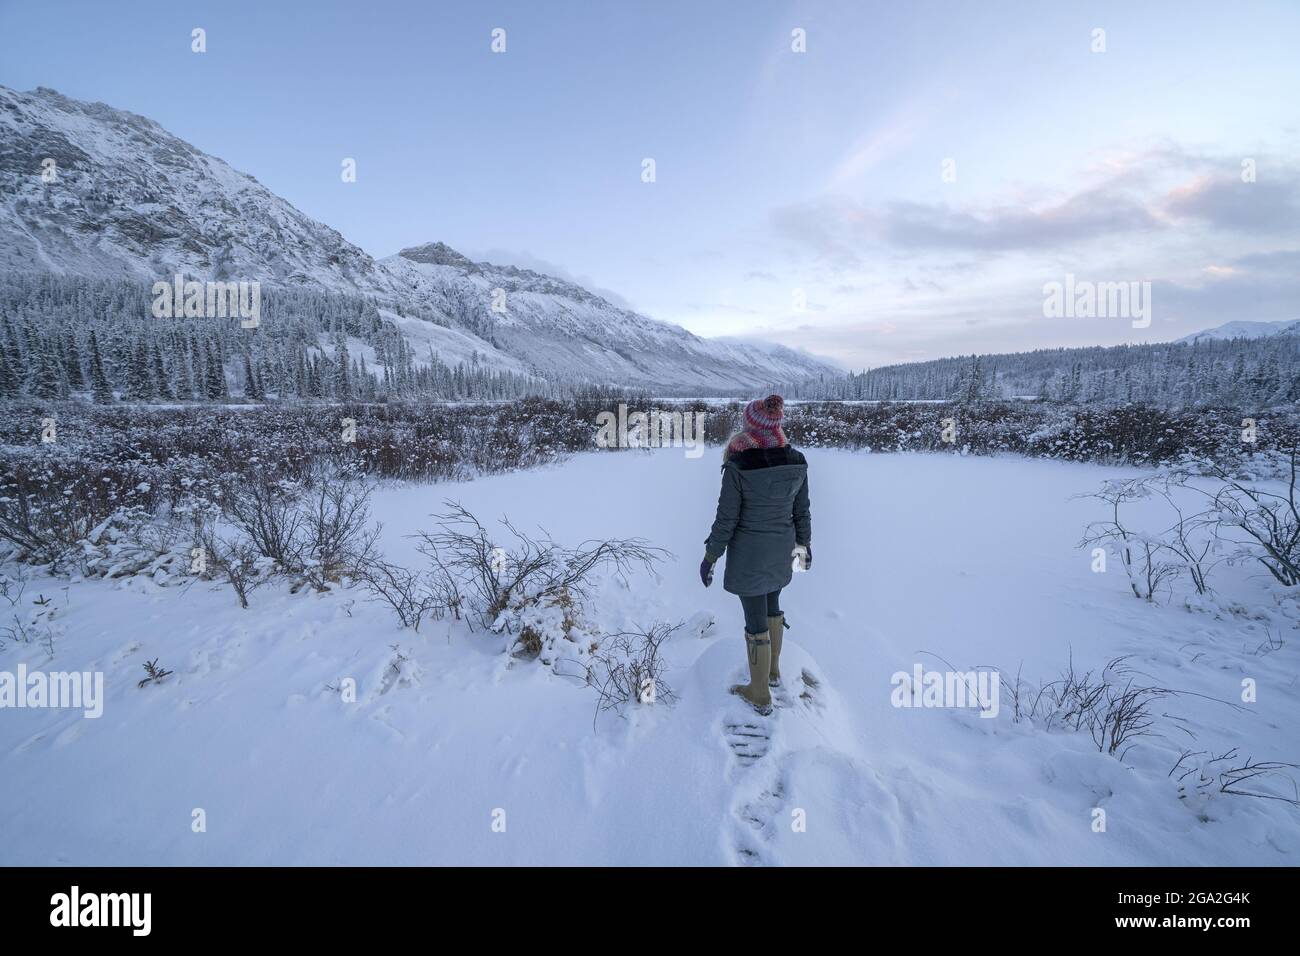 View from behind of a woman standing in a snowy field looking at the snow covered mountains in the soft, morning light; Whitehorse, Yukon, Canada Stock Photo